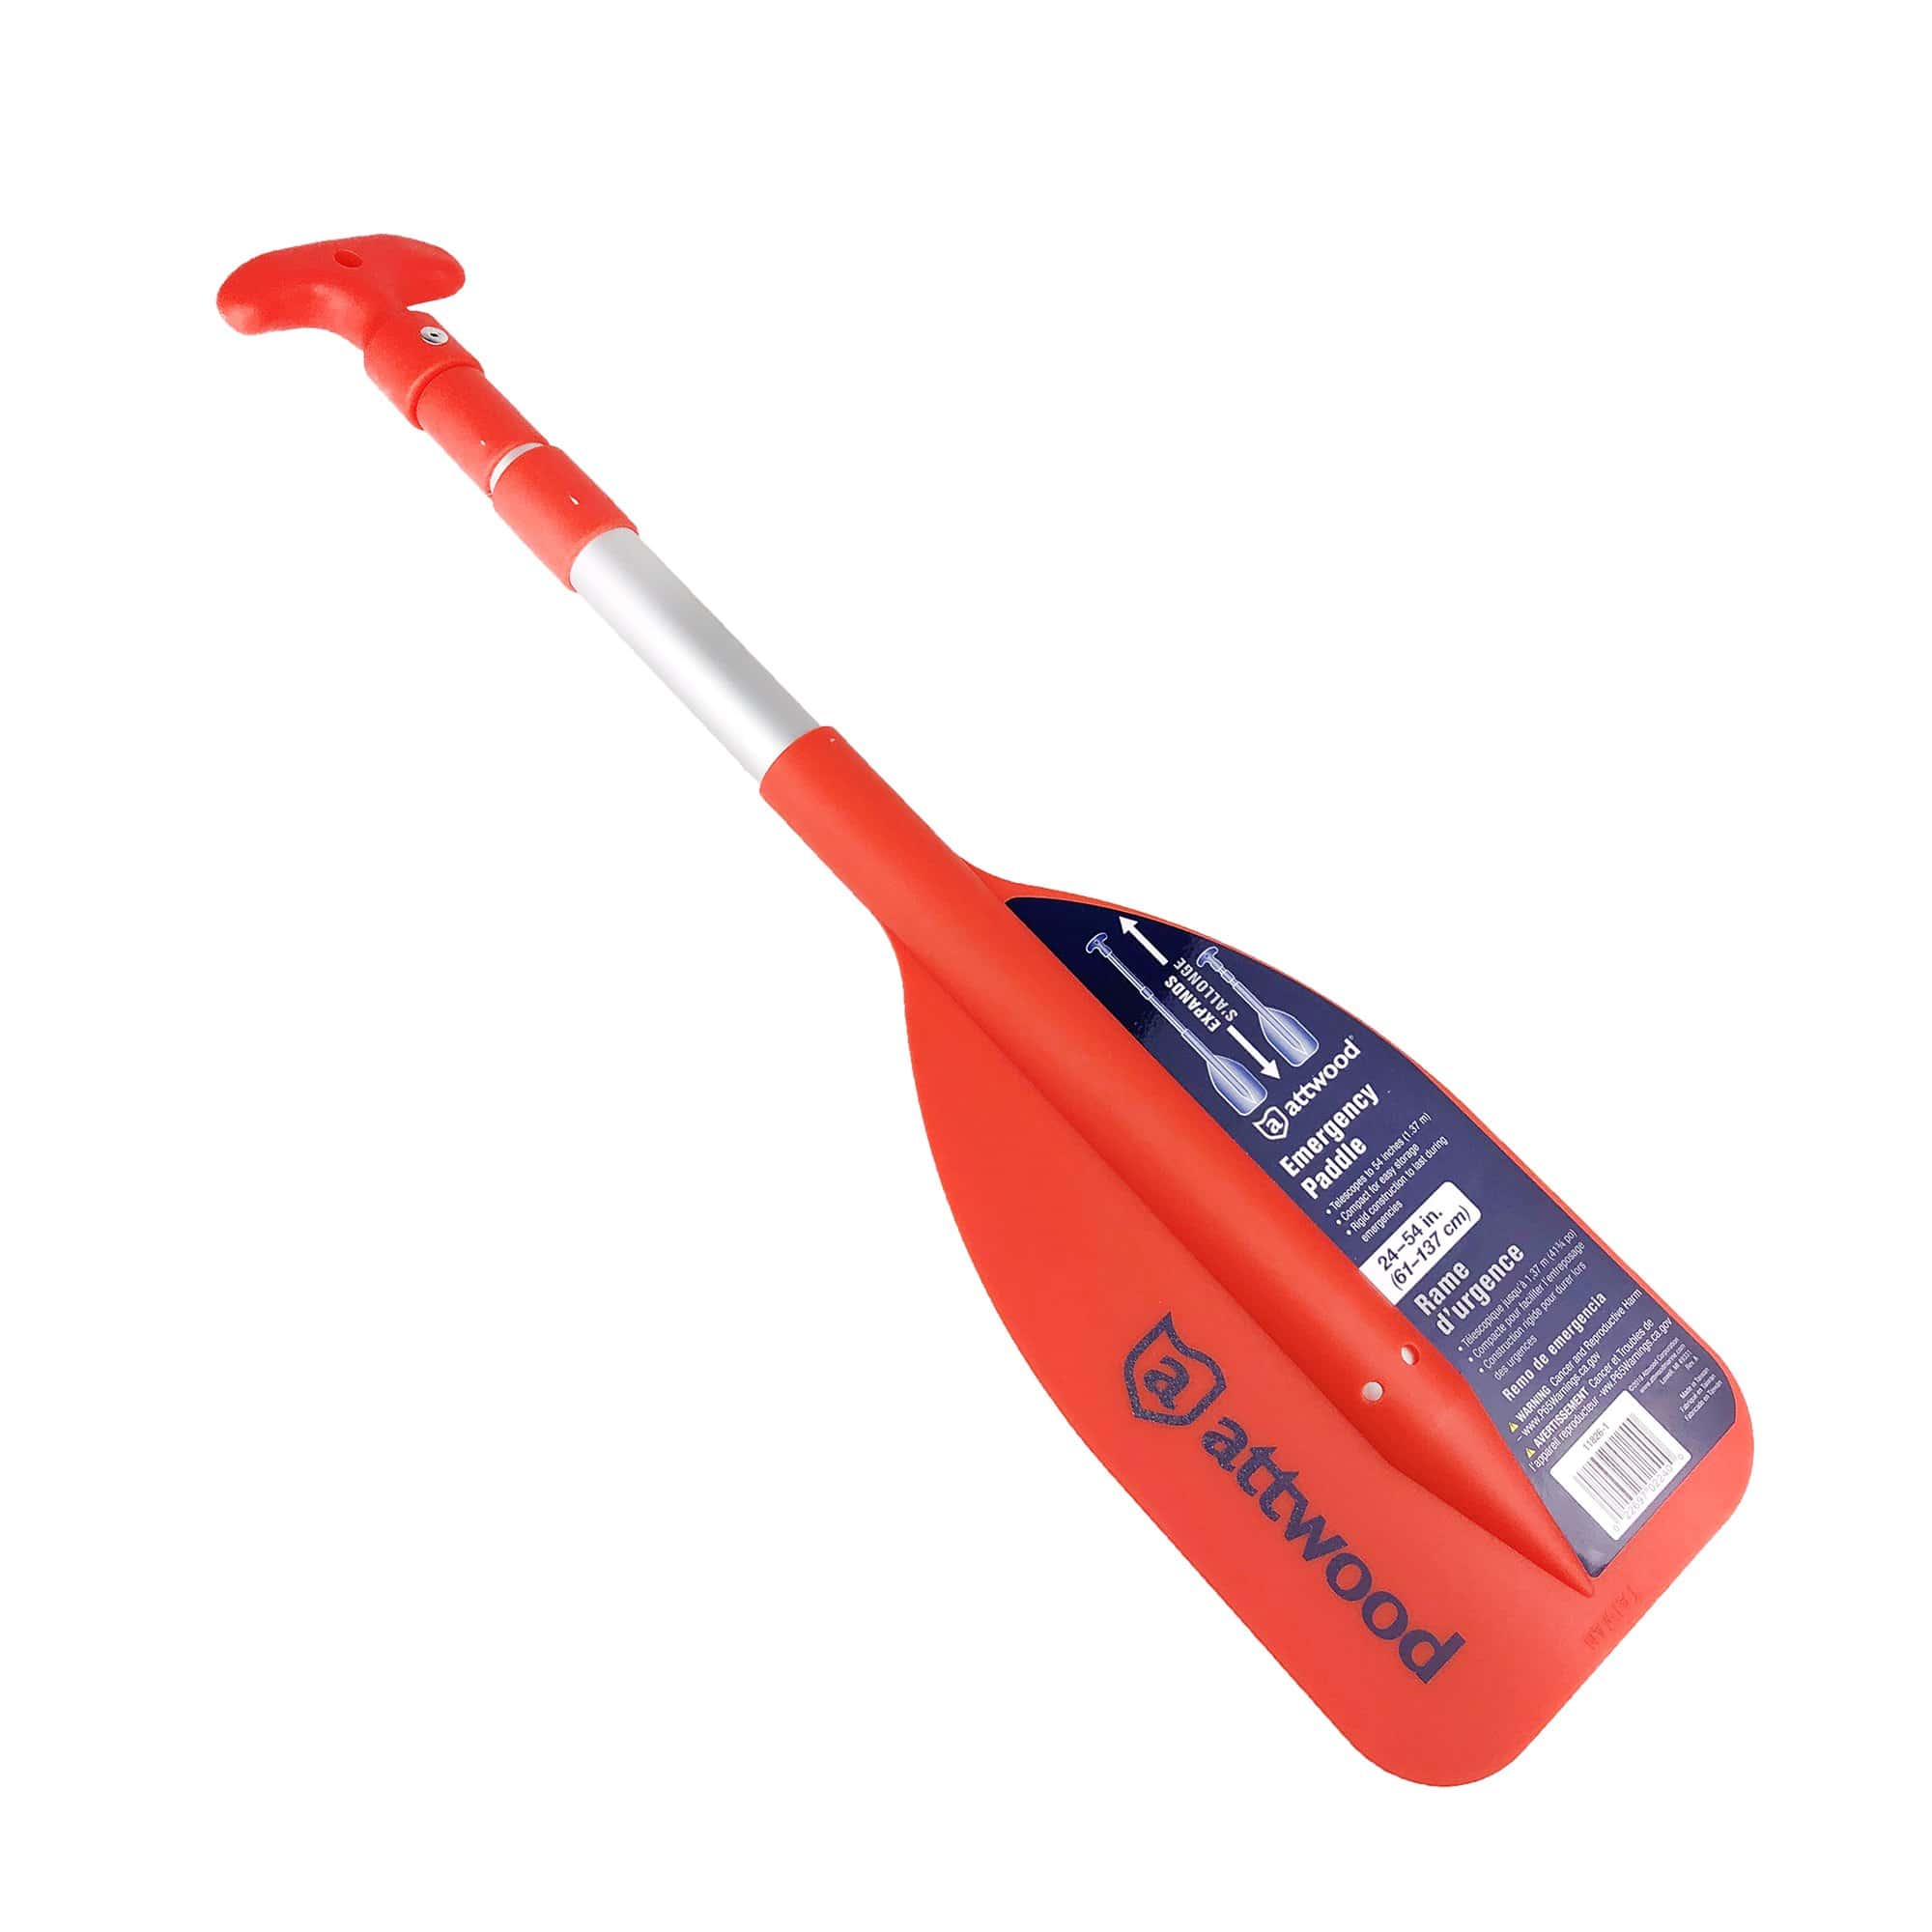 Attwood 11826-1 Emergency 25-inch to 54-Inch Telescoping Paddle for Boating, Orange